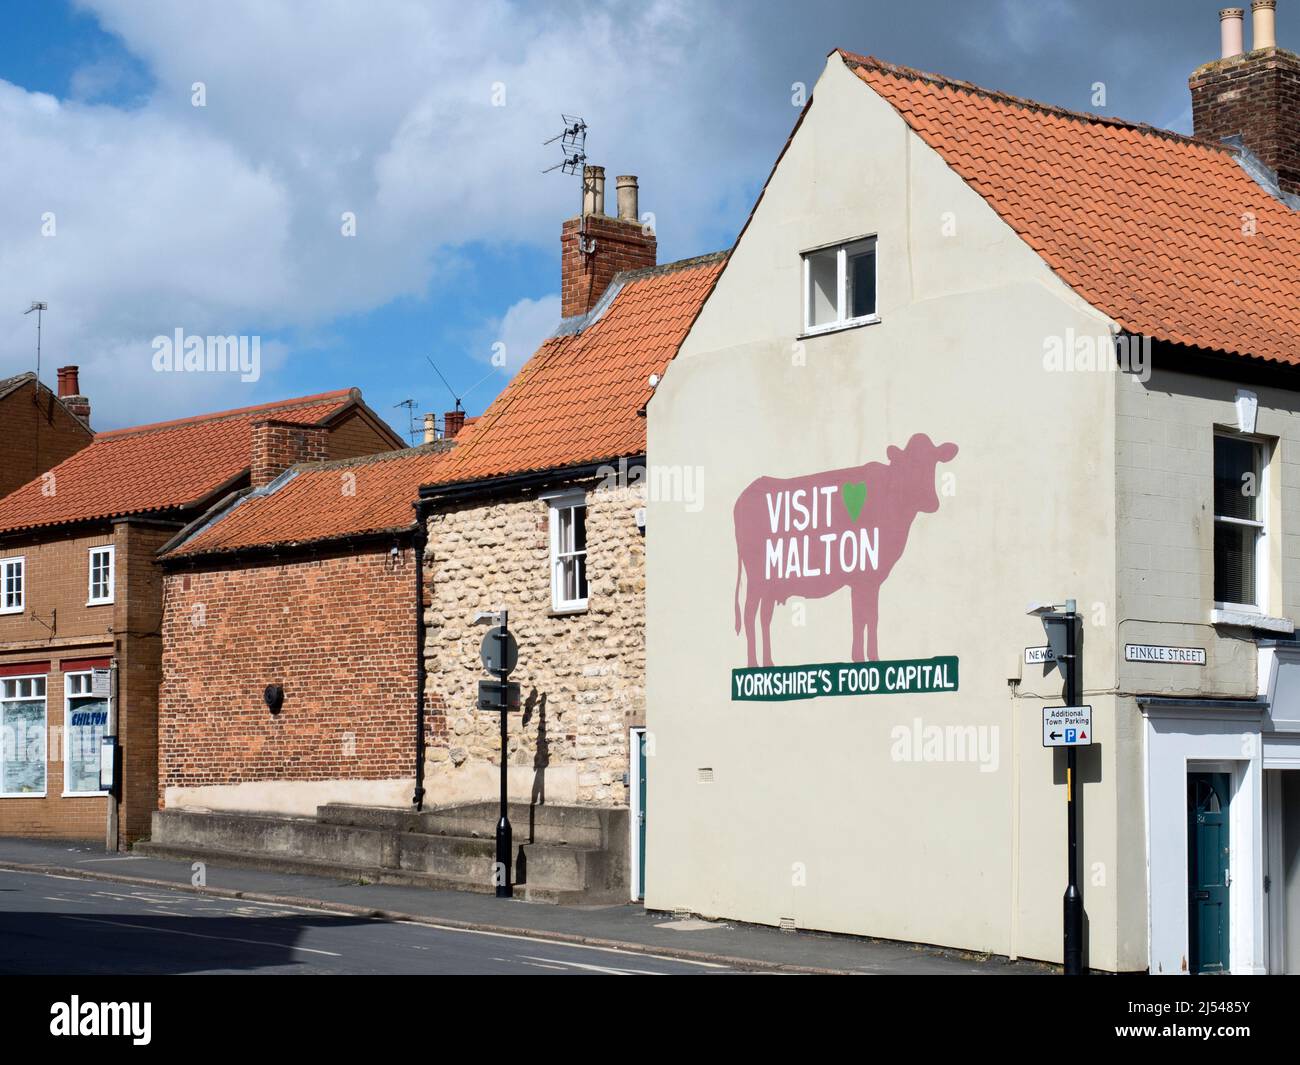 Visit Malton Yorkshires Food Capital sign on the corner of Newgate and Finkle Street in Malton North Yorkshire England Stock Photo